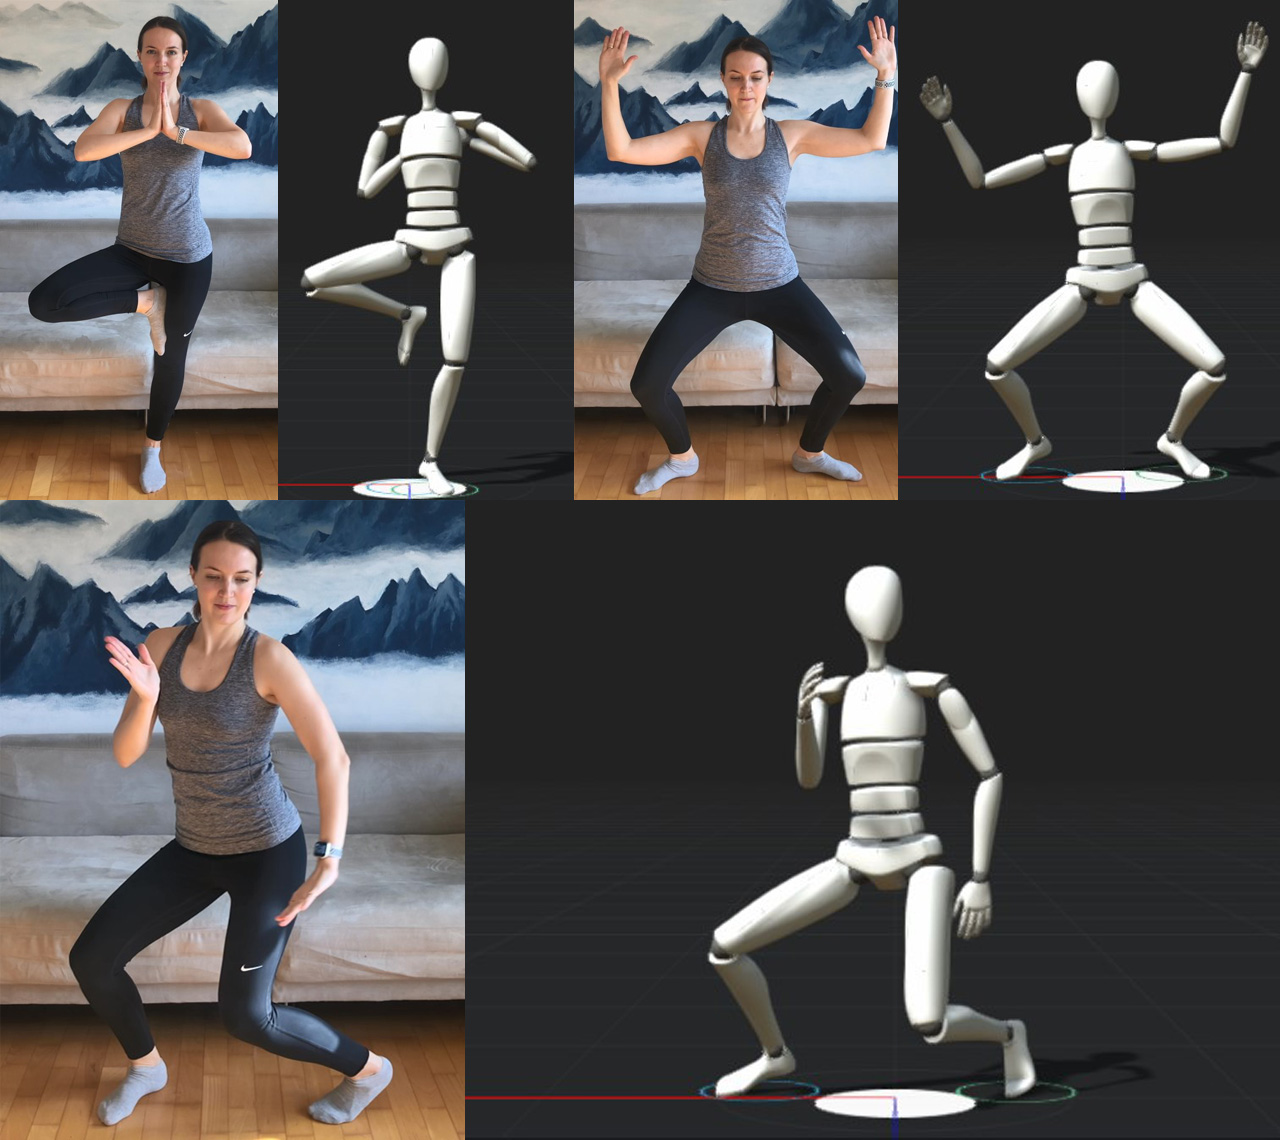 Three different poses from Mascha's original video compared to the results, created by motion capture with AI